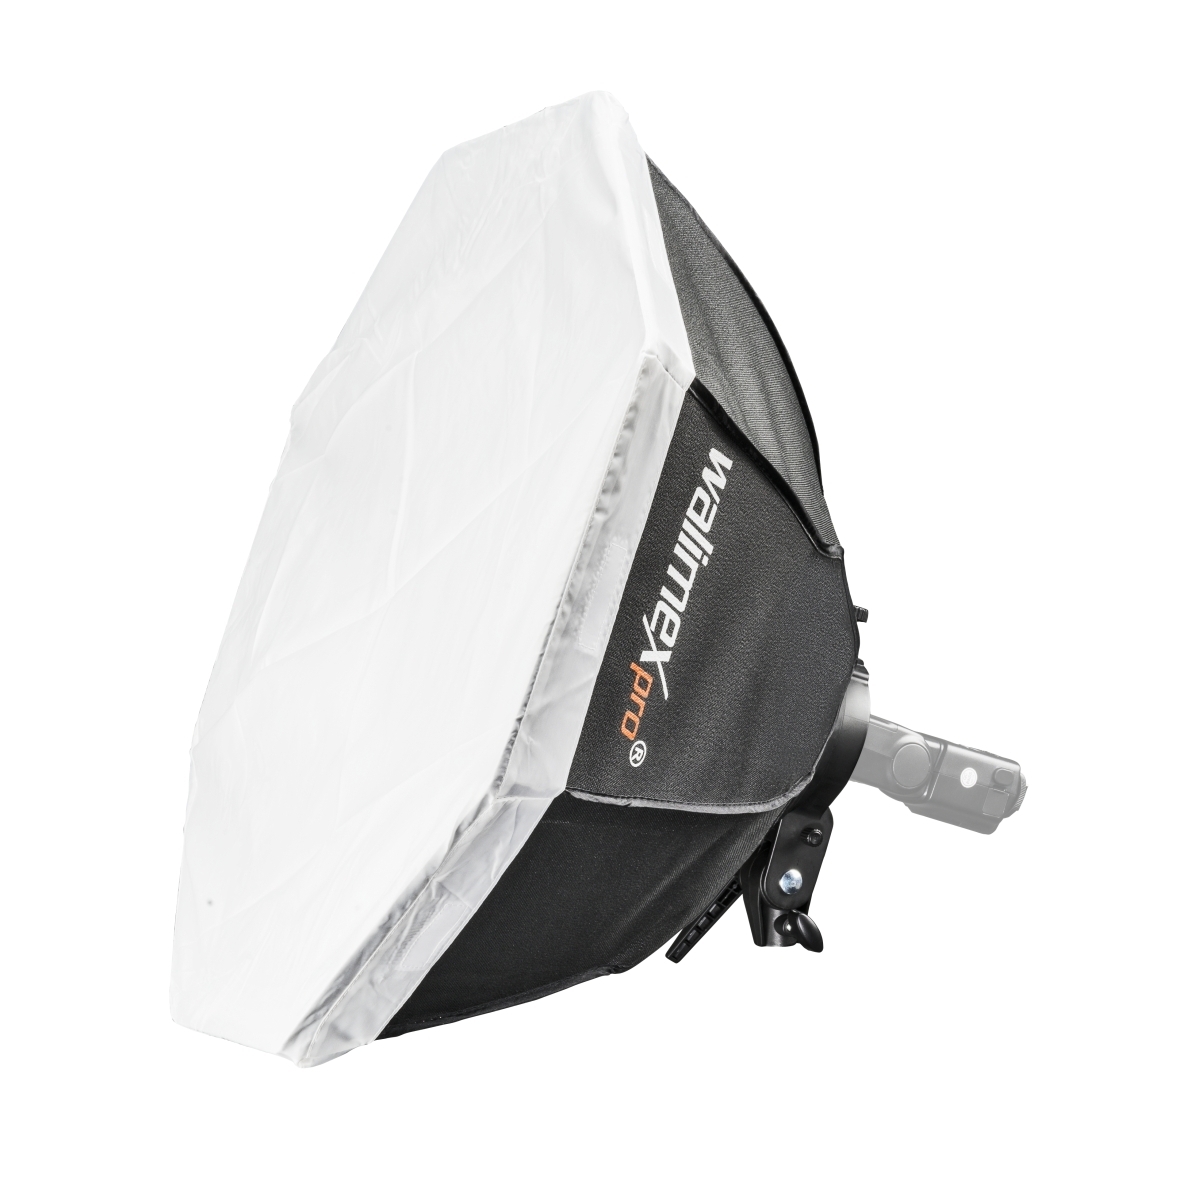 Walimex Octagon Softbox Ø 60cm for Compact Flashes